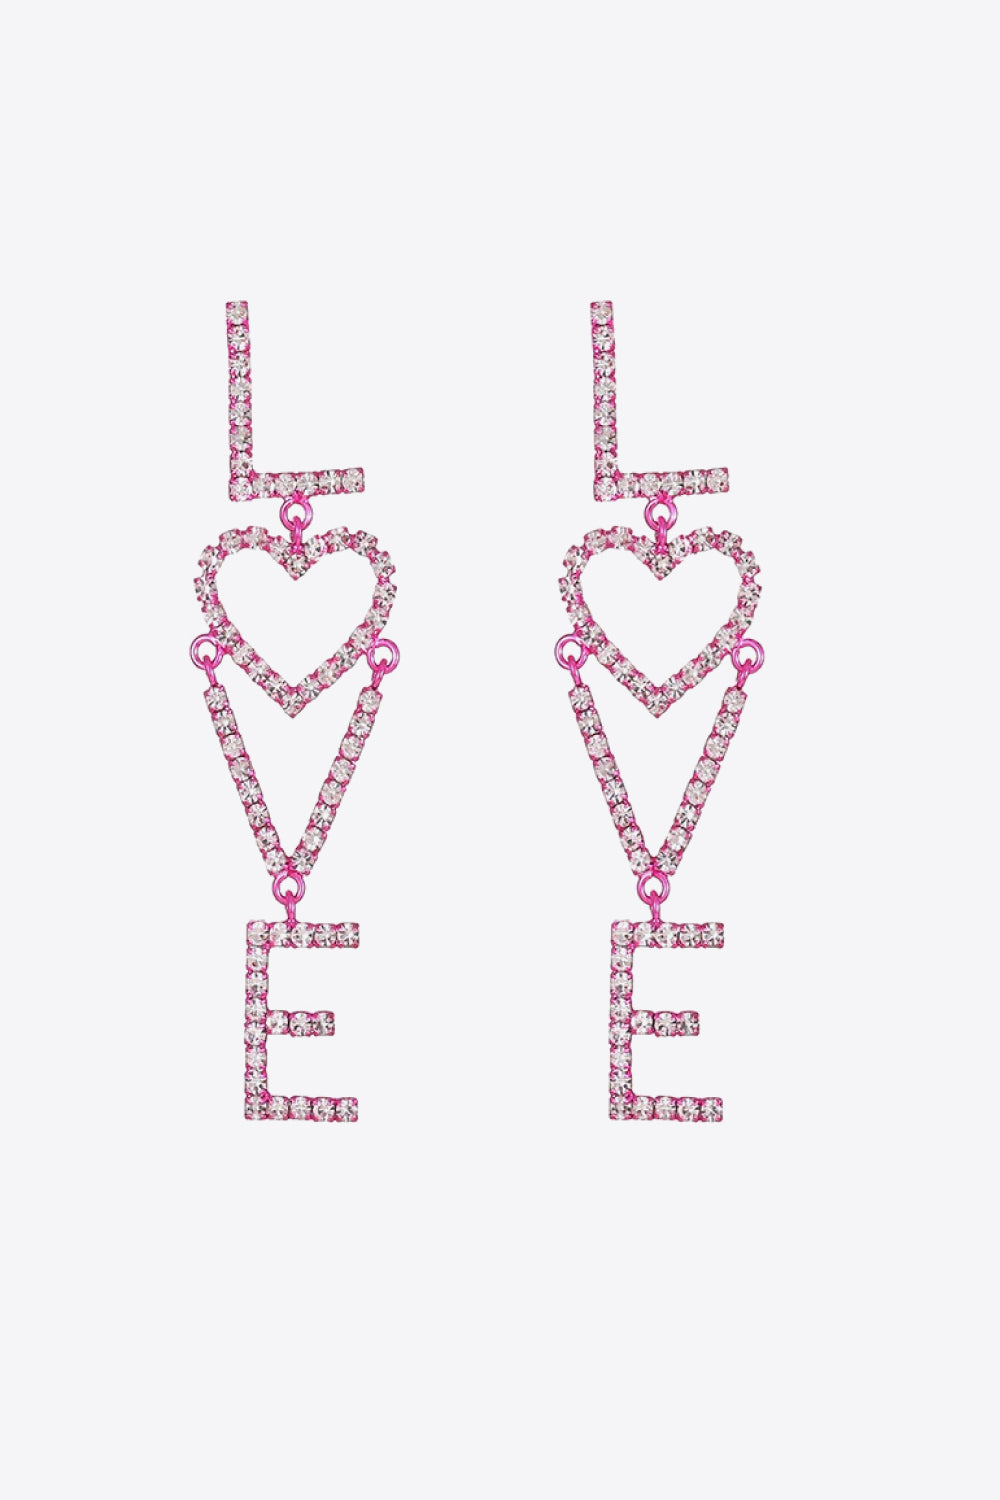 Hot Pink One Size - LOVE Glass Stone Zinc Alloy Earrings - 2 styles - earrings at TFC&H Co.